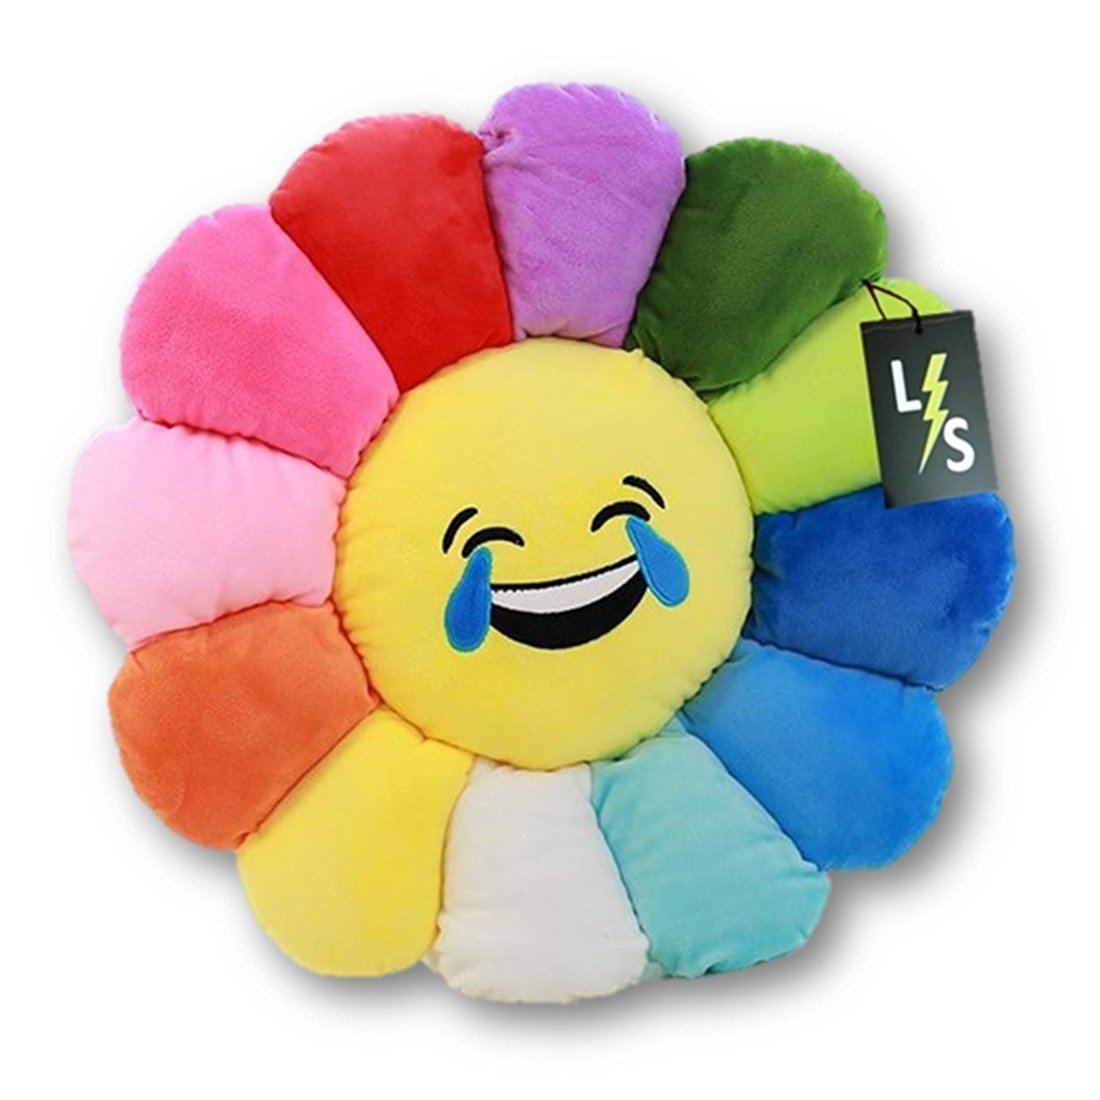 https://www.lightningstoreonline.com/cdn/shop/products/toy-lightningstore-adorable-cute-colorful-rainbow-red-orange-yellow-blue-green-purple-crying-laughing-emotion-sunflower-doll-pillow-cushion-realistic-looking-plush-toys-plushie-children-s-gifts-animals-1.jpg?v=1571439606